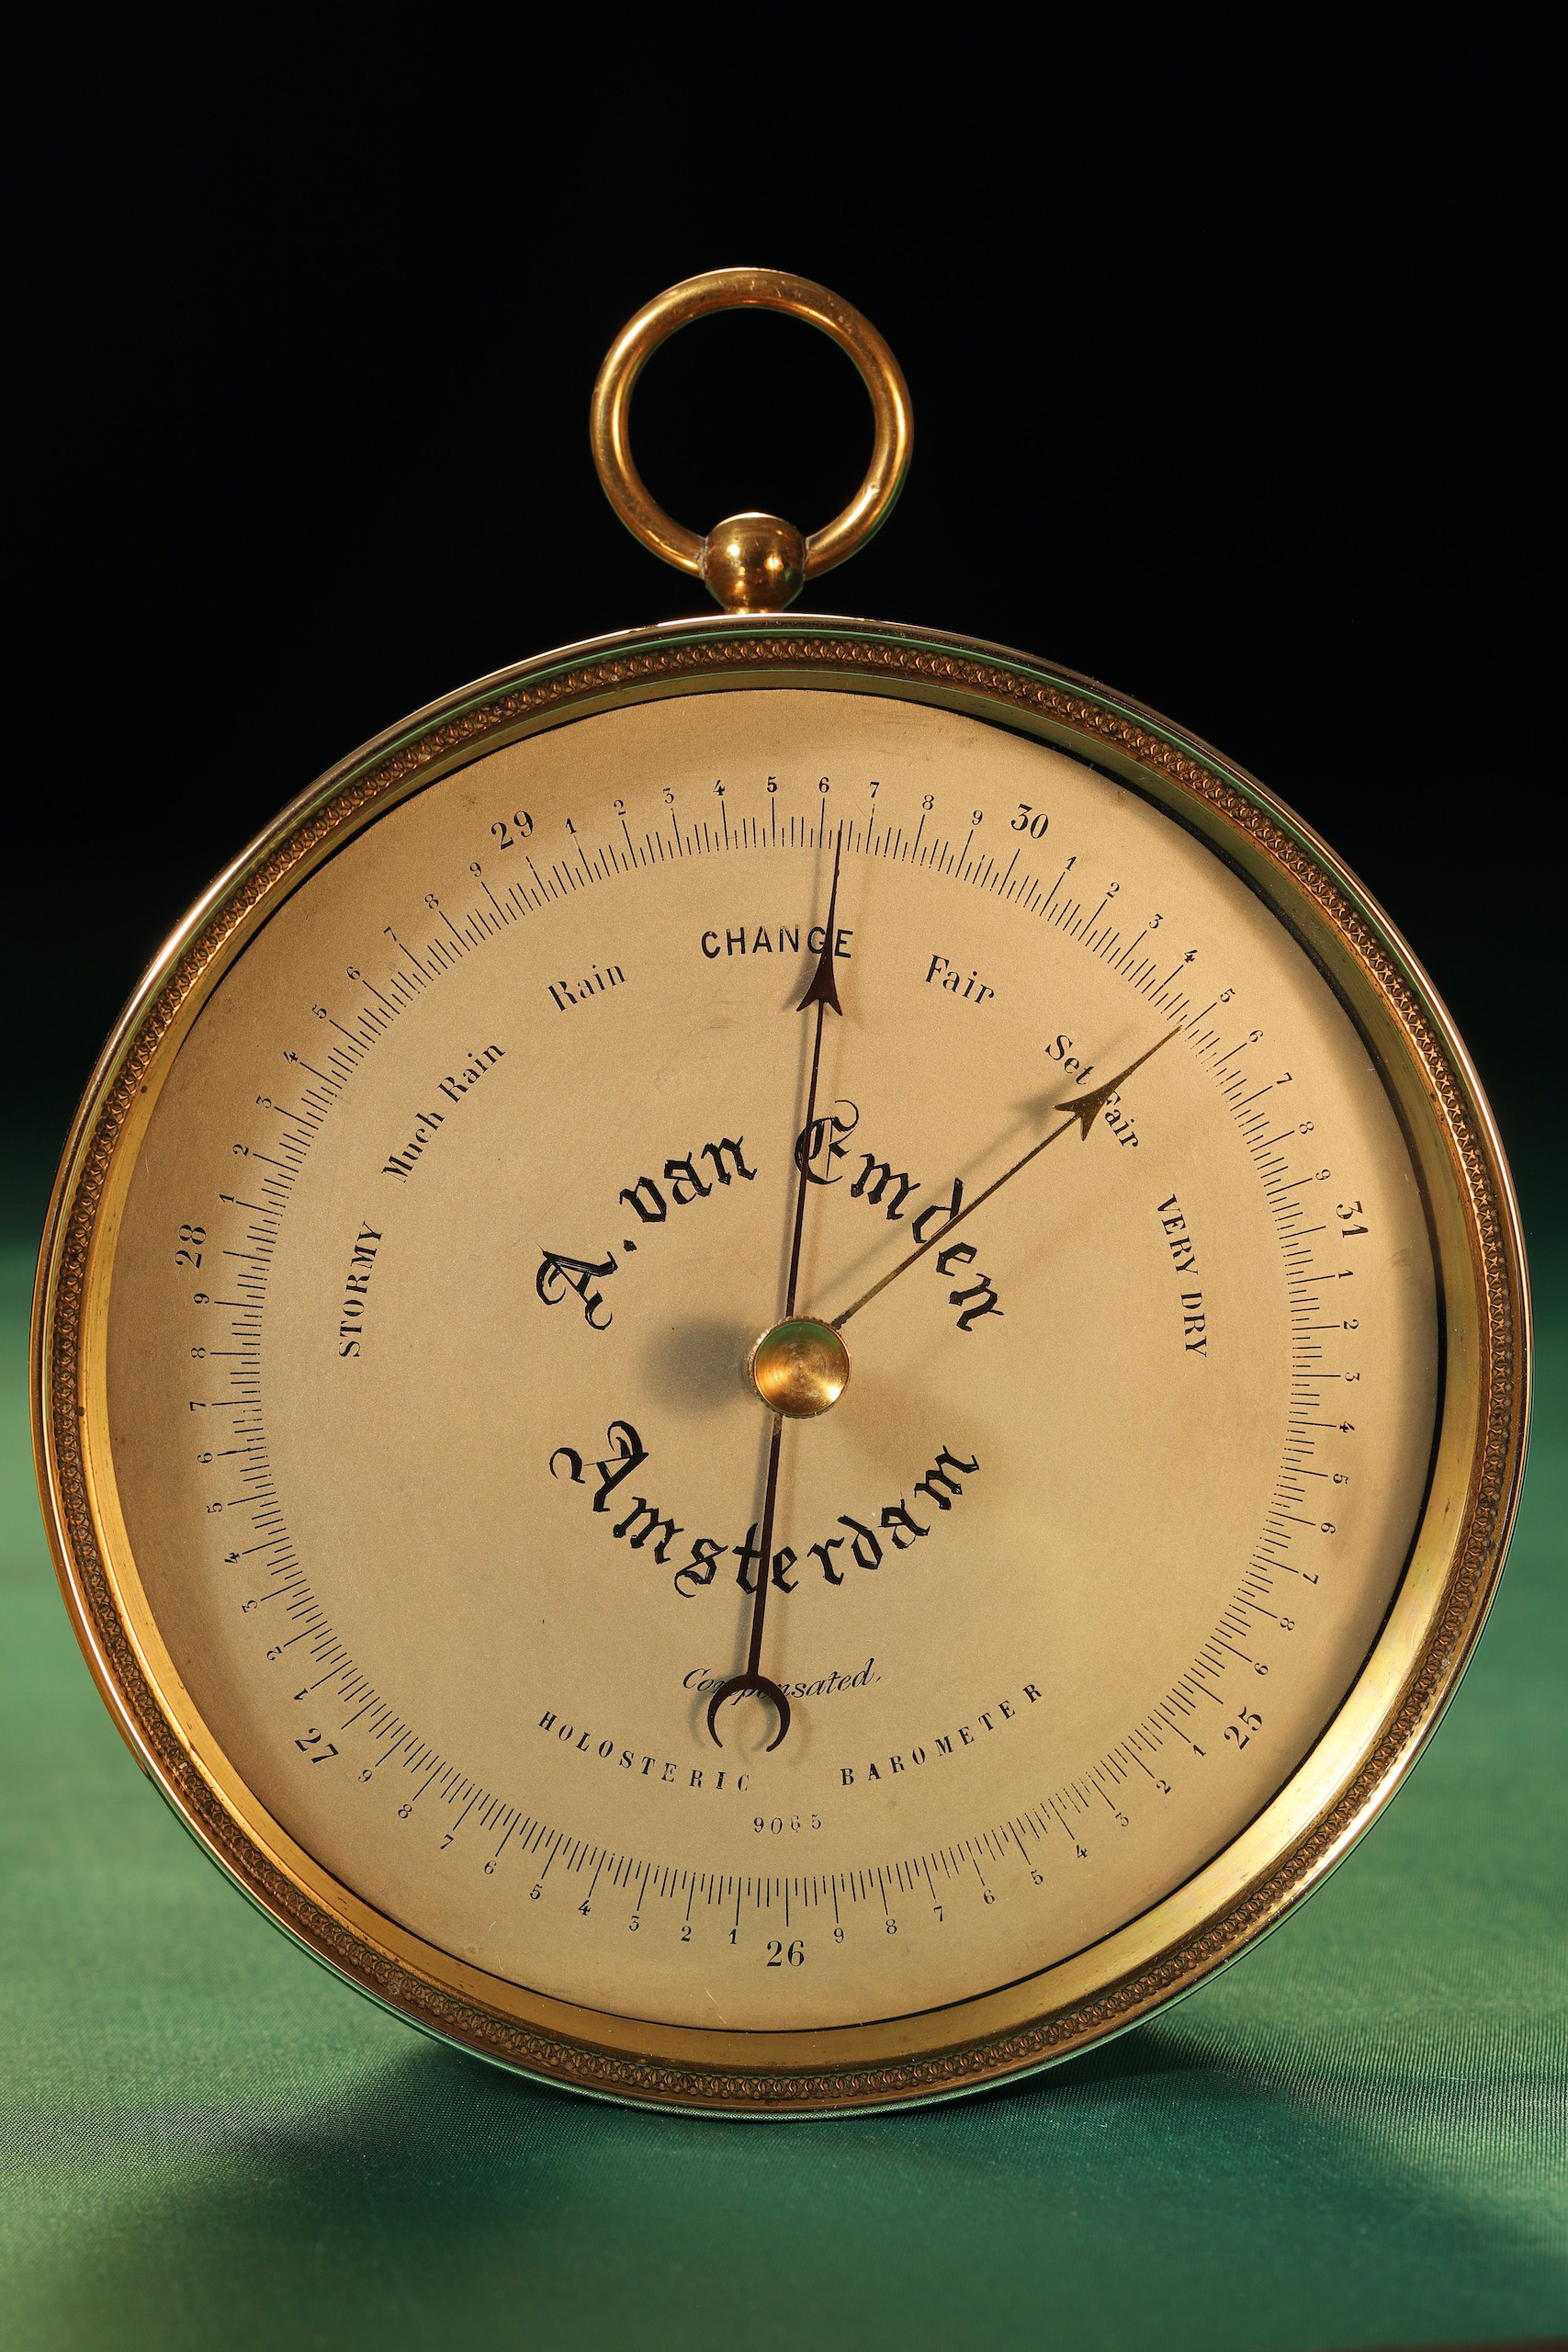 Selling Your Barometer, Barograph or Other Scientific Instrument